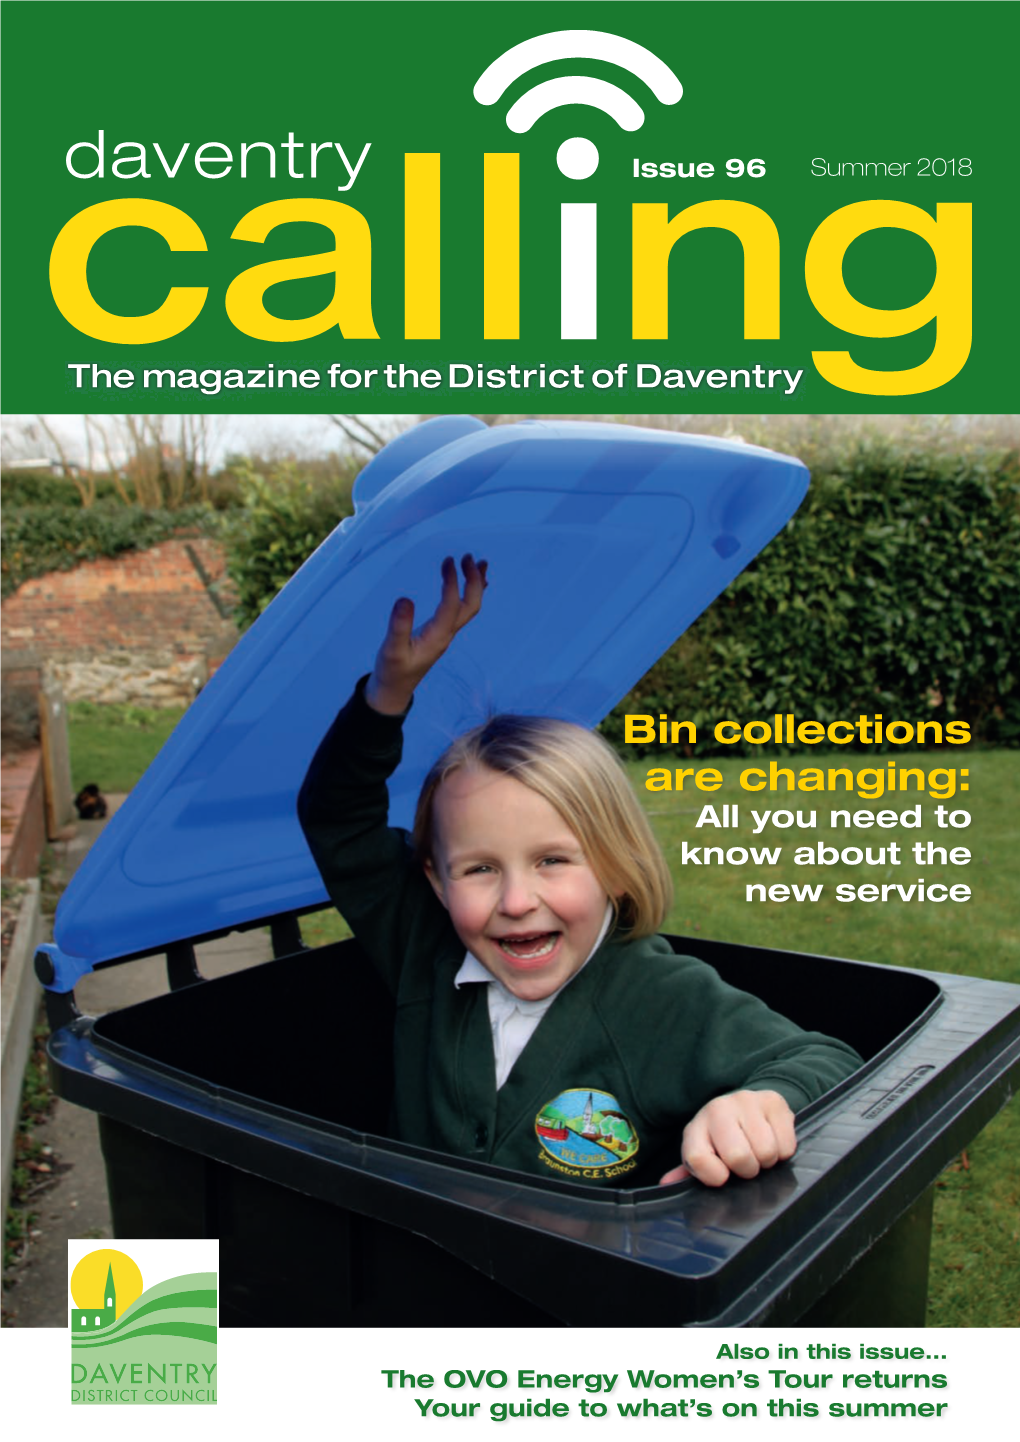 Bin Collections Are Changing: All You Need to Know About the New Service